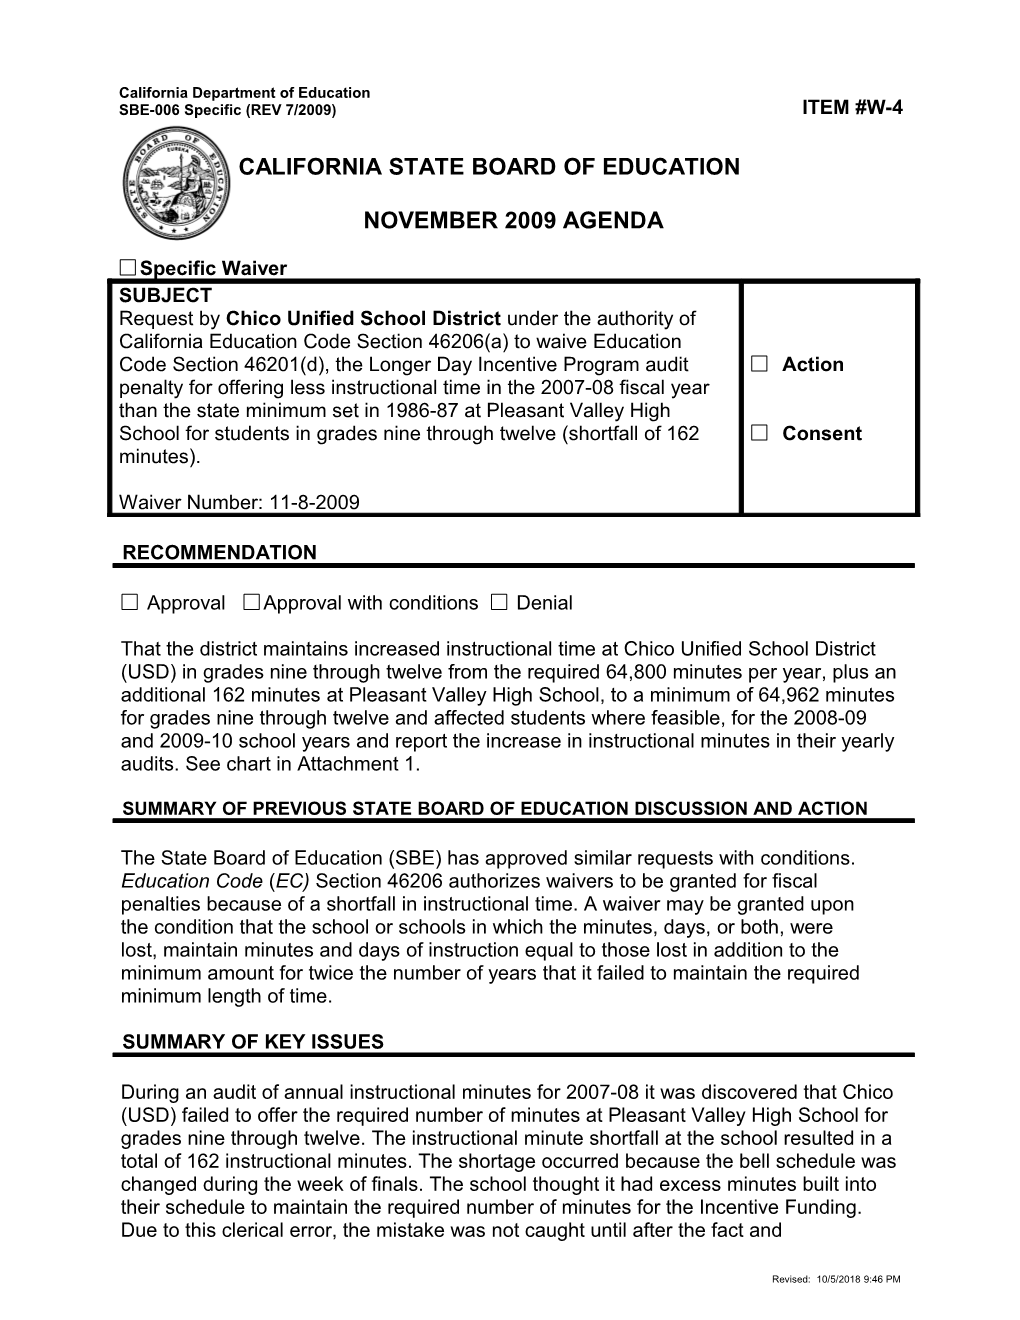 November 2009 Waiver Item W4 - Meeting Agendas (CA State Board of Education)